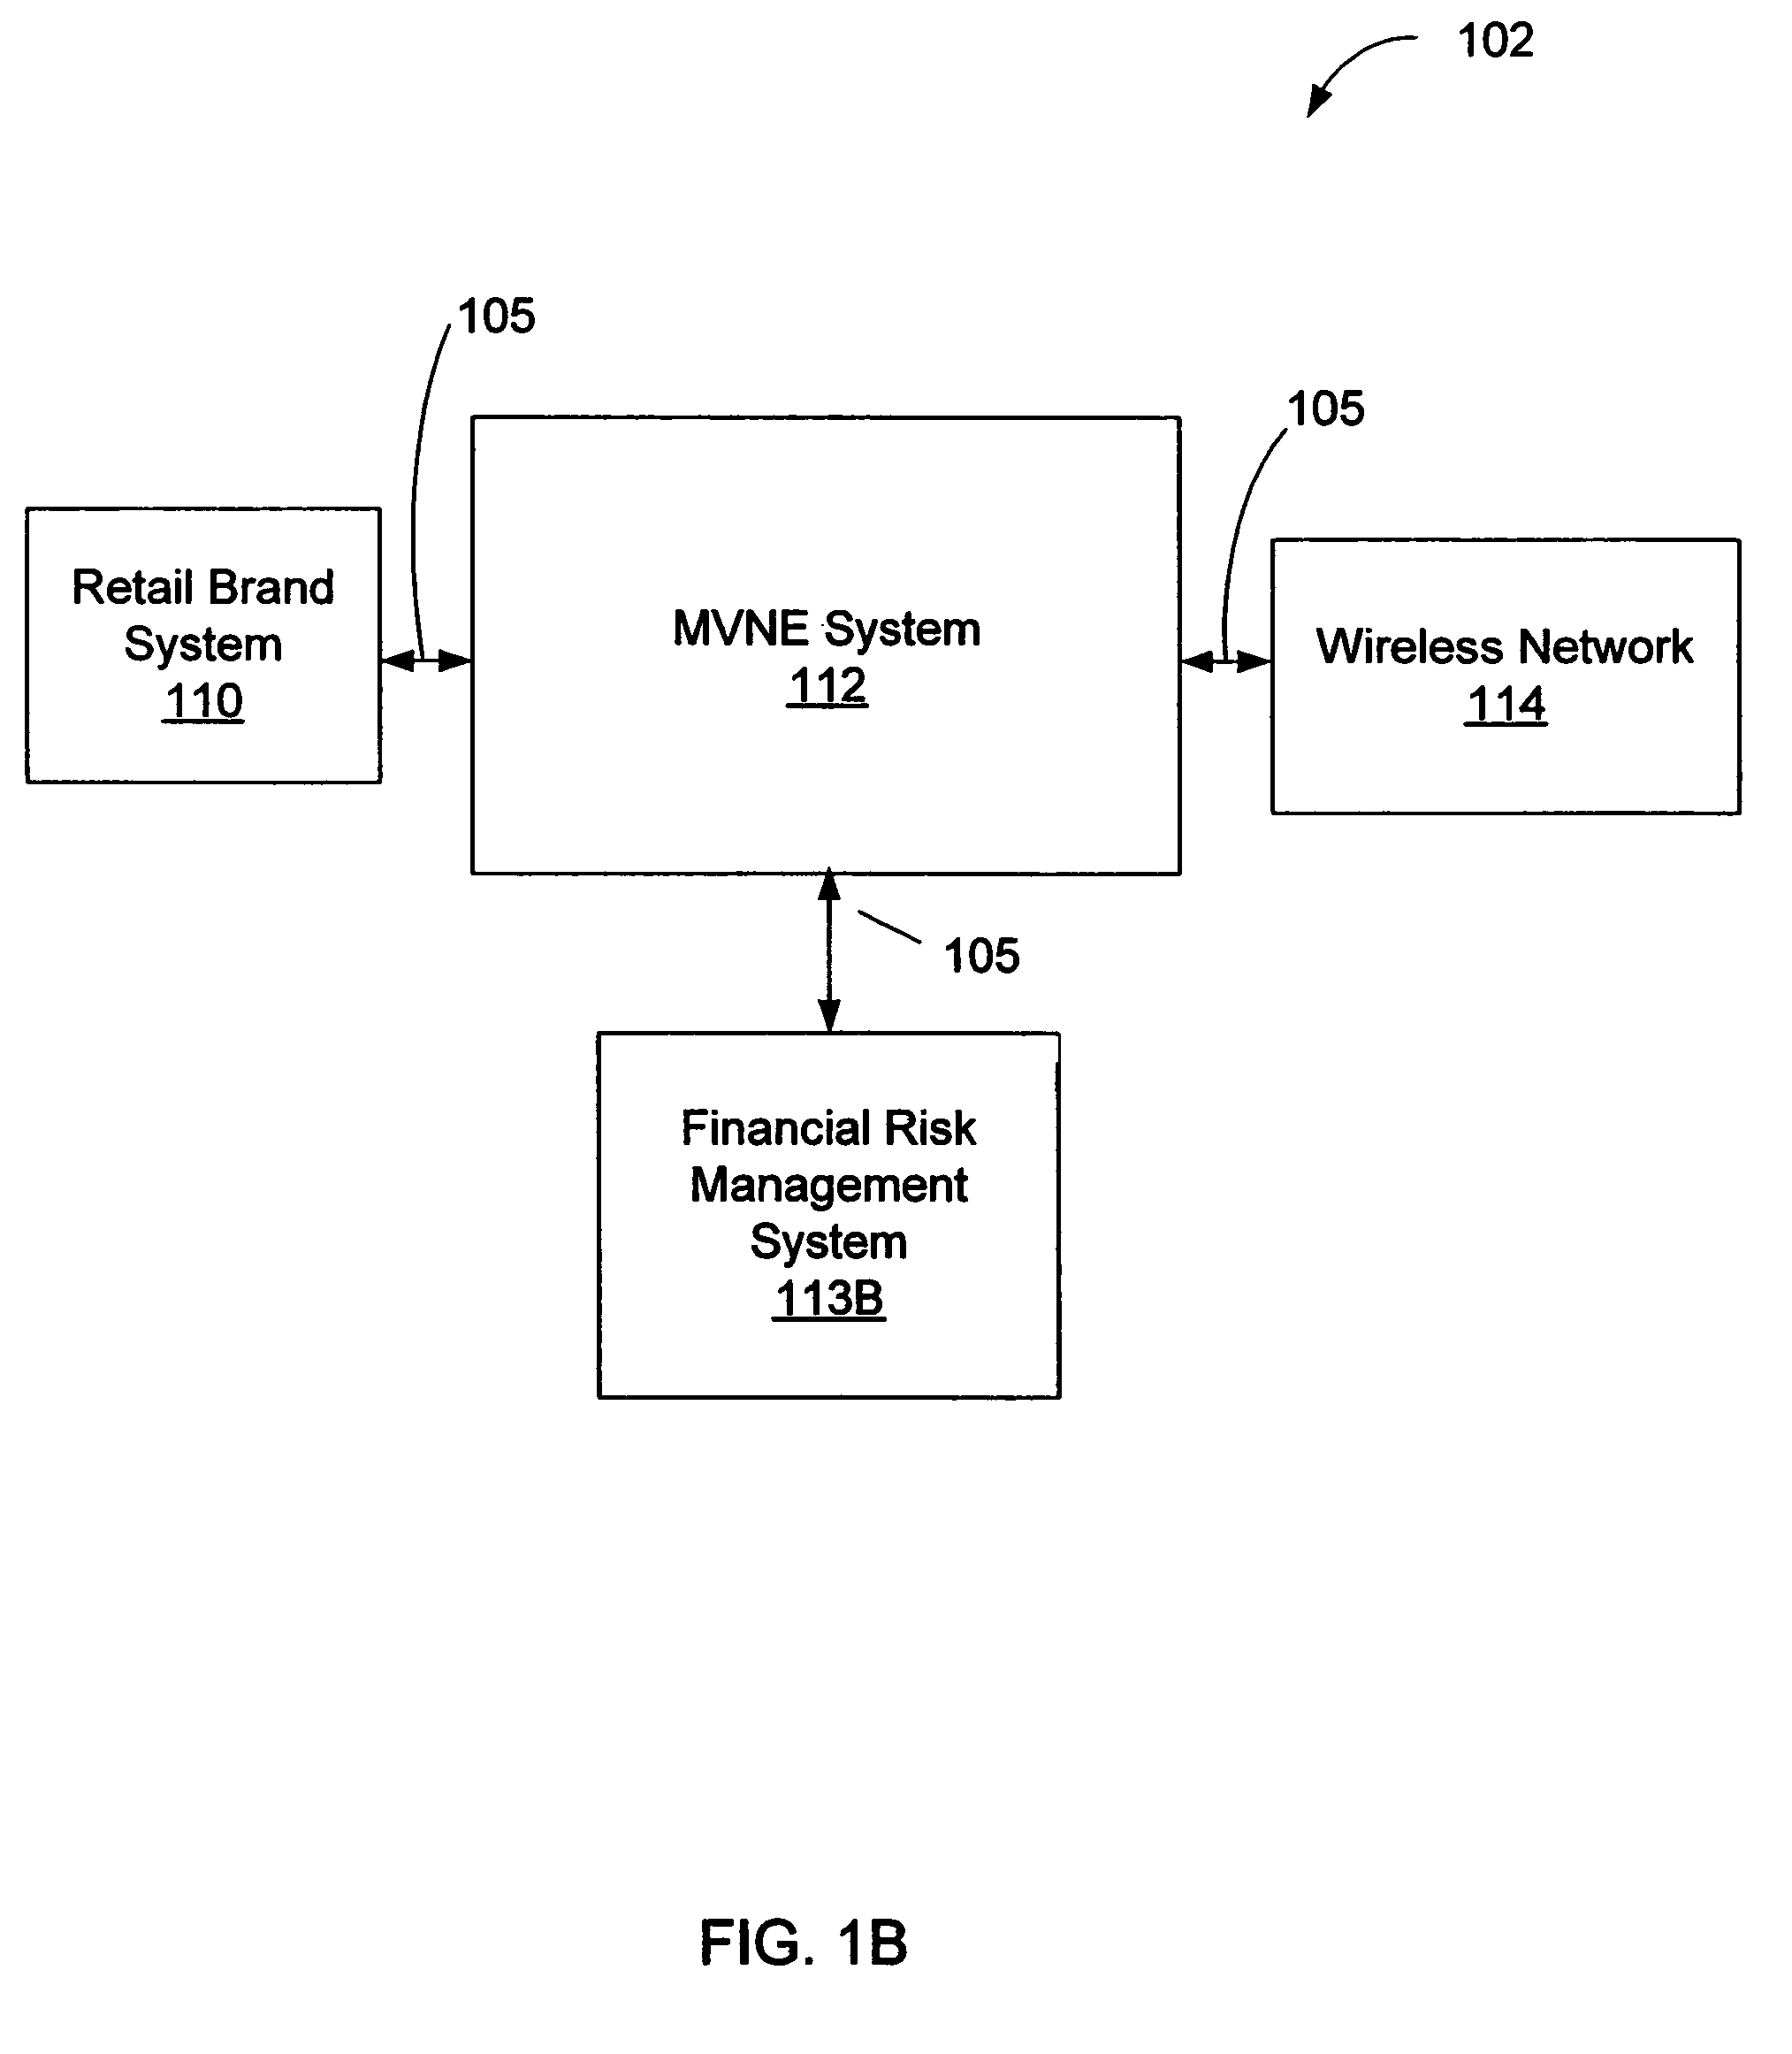 Method for minimizing financial risk for wireless services